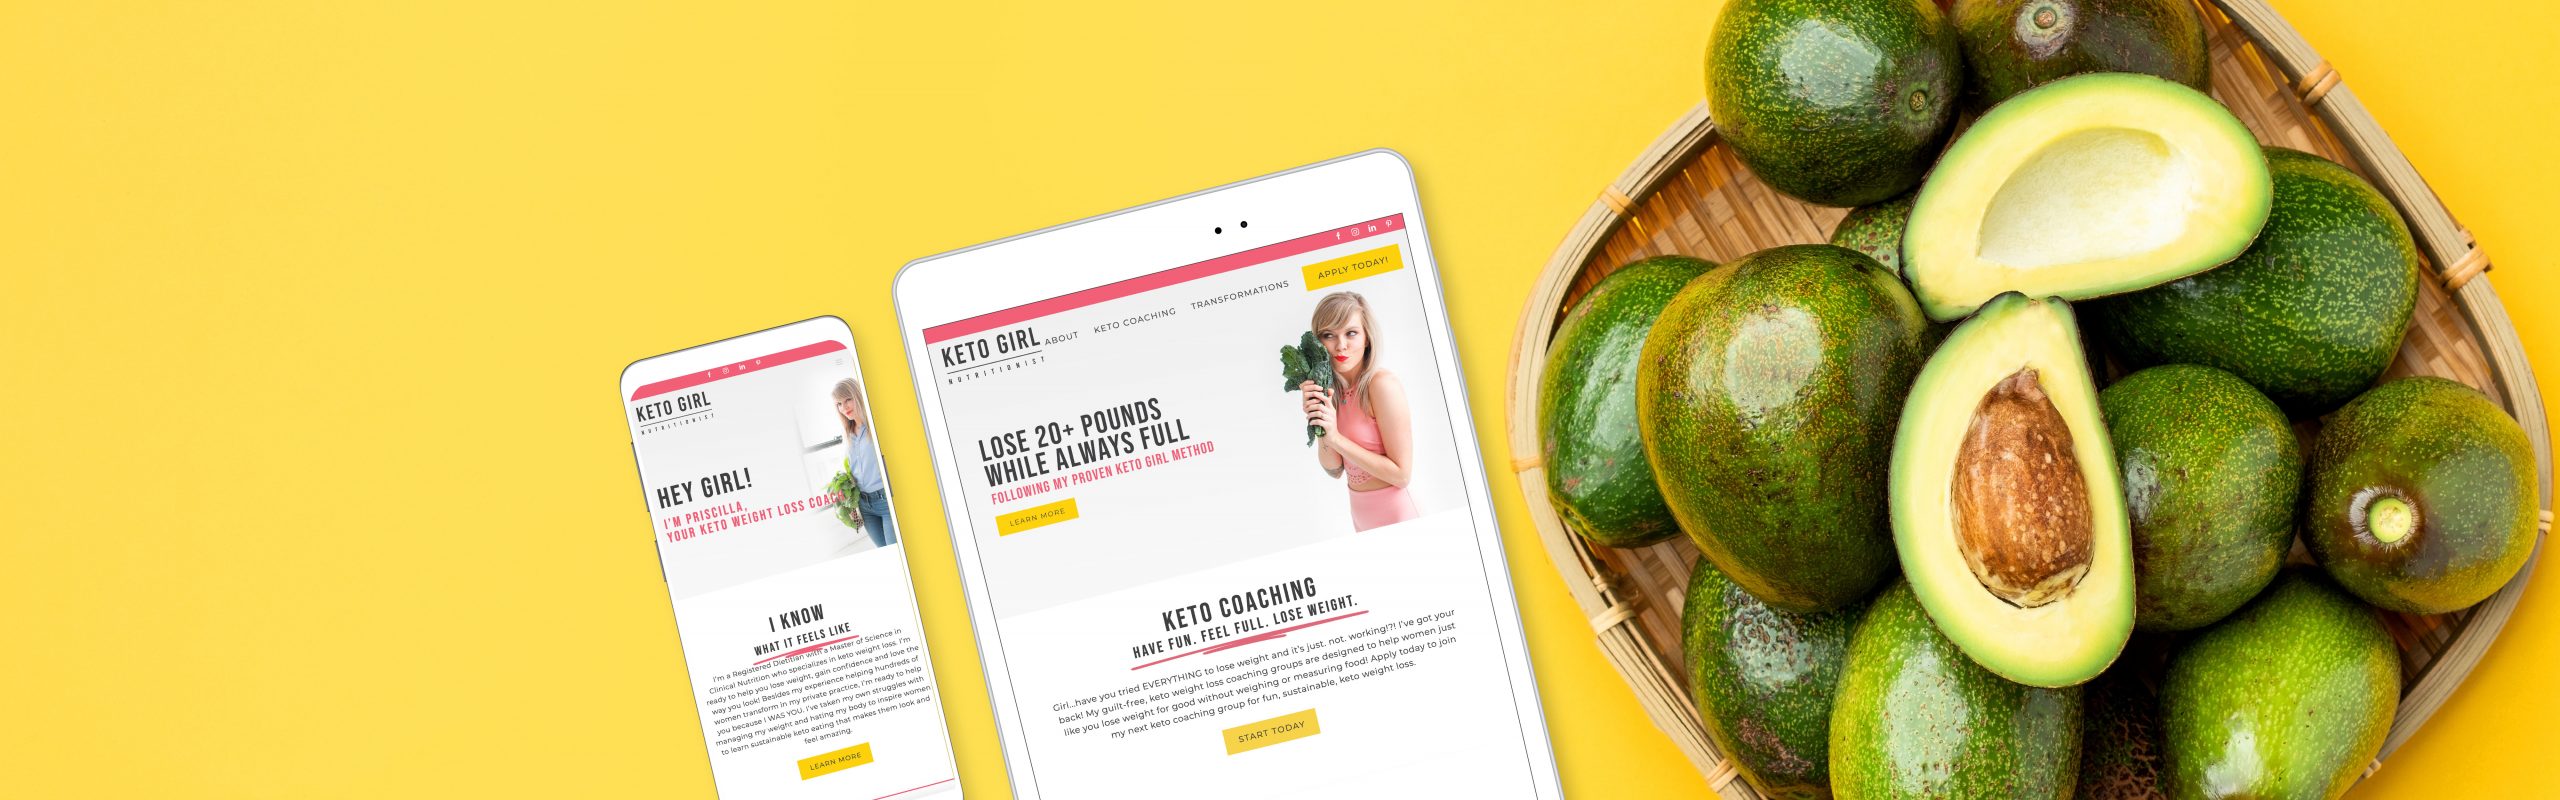 A split composition image showing a basket of fresh avocados on the right, against a yellow background, and two mobile devices on the left displaying a webpage titled "Keto Girl Nutritionist" with